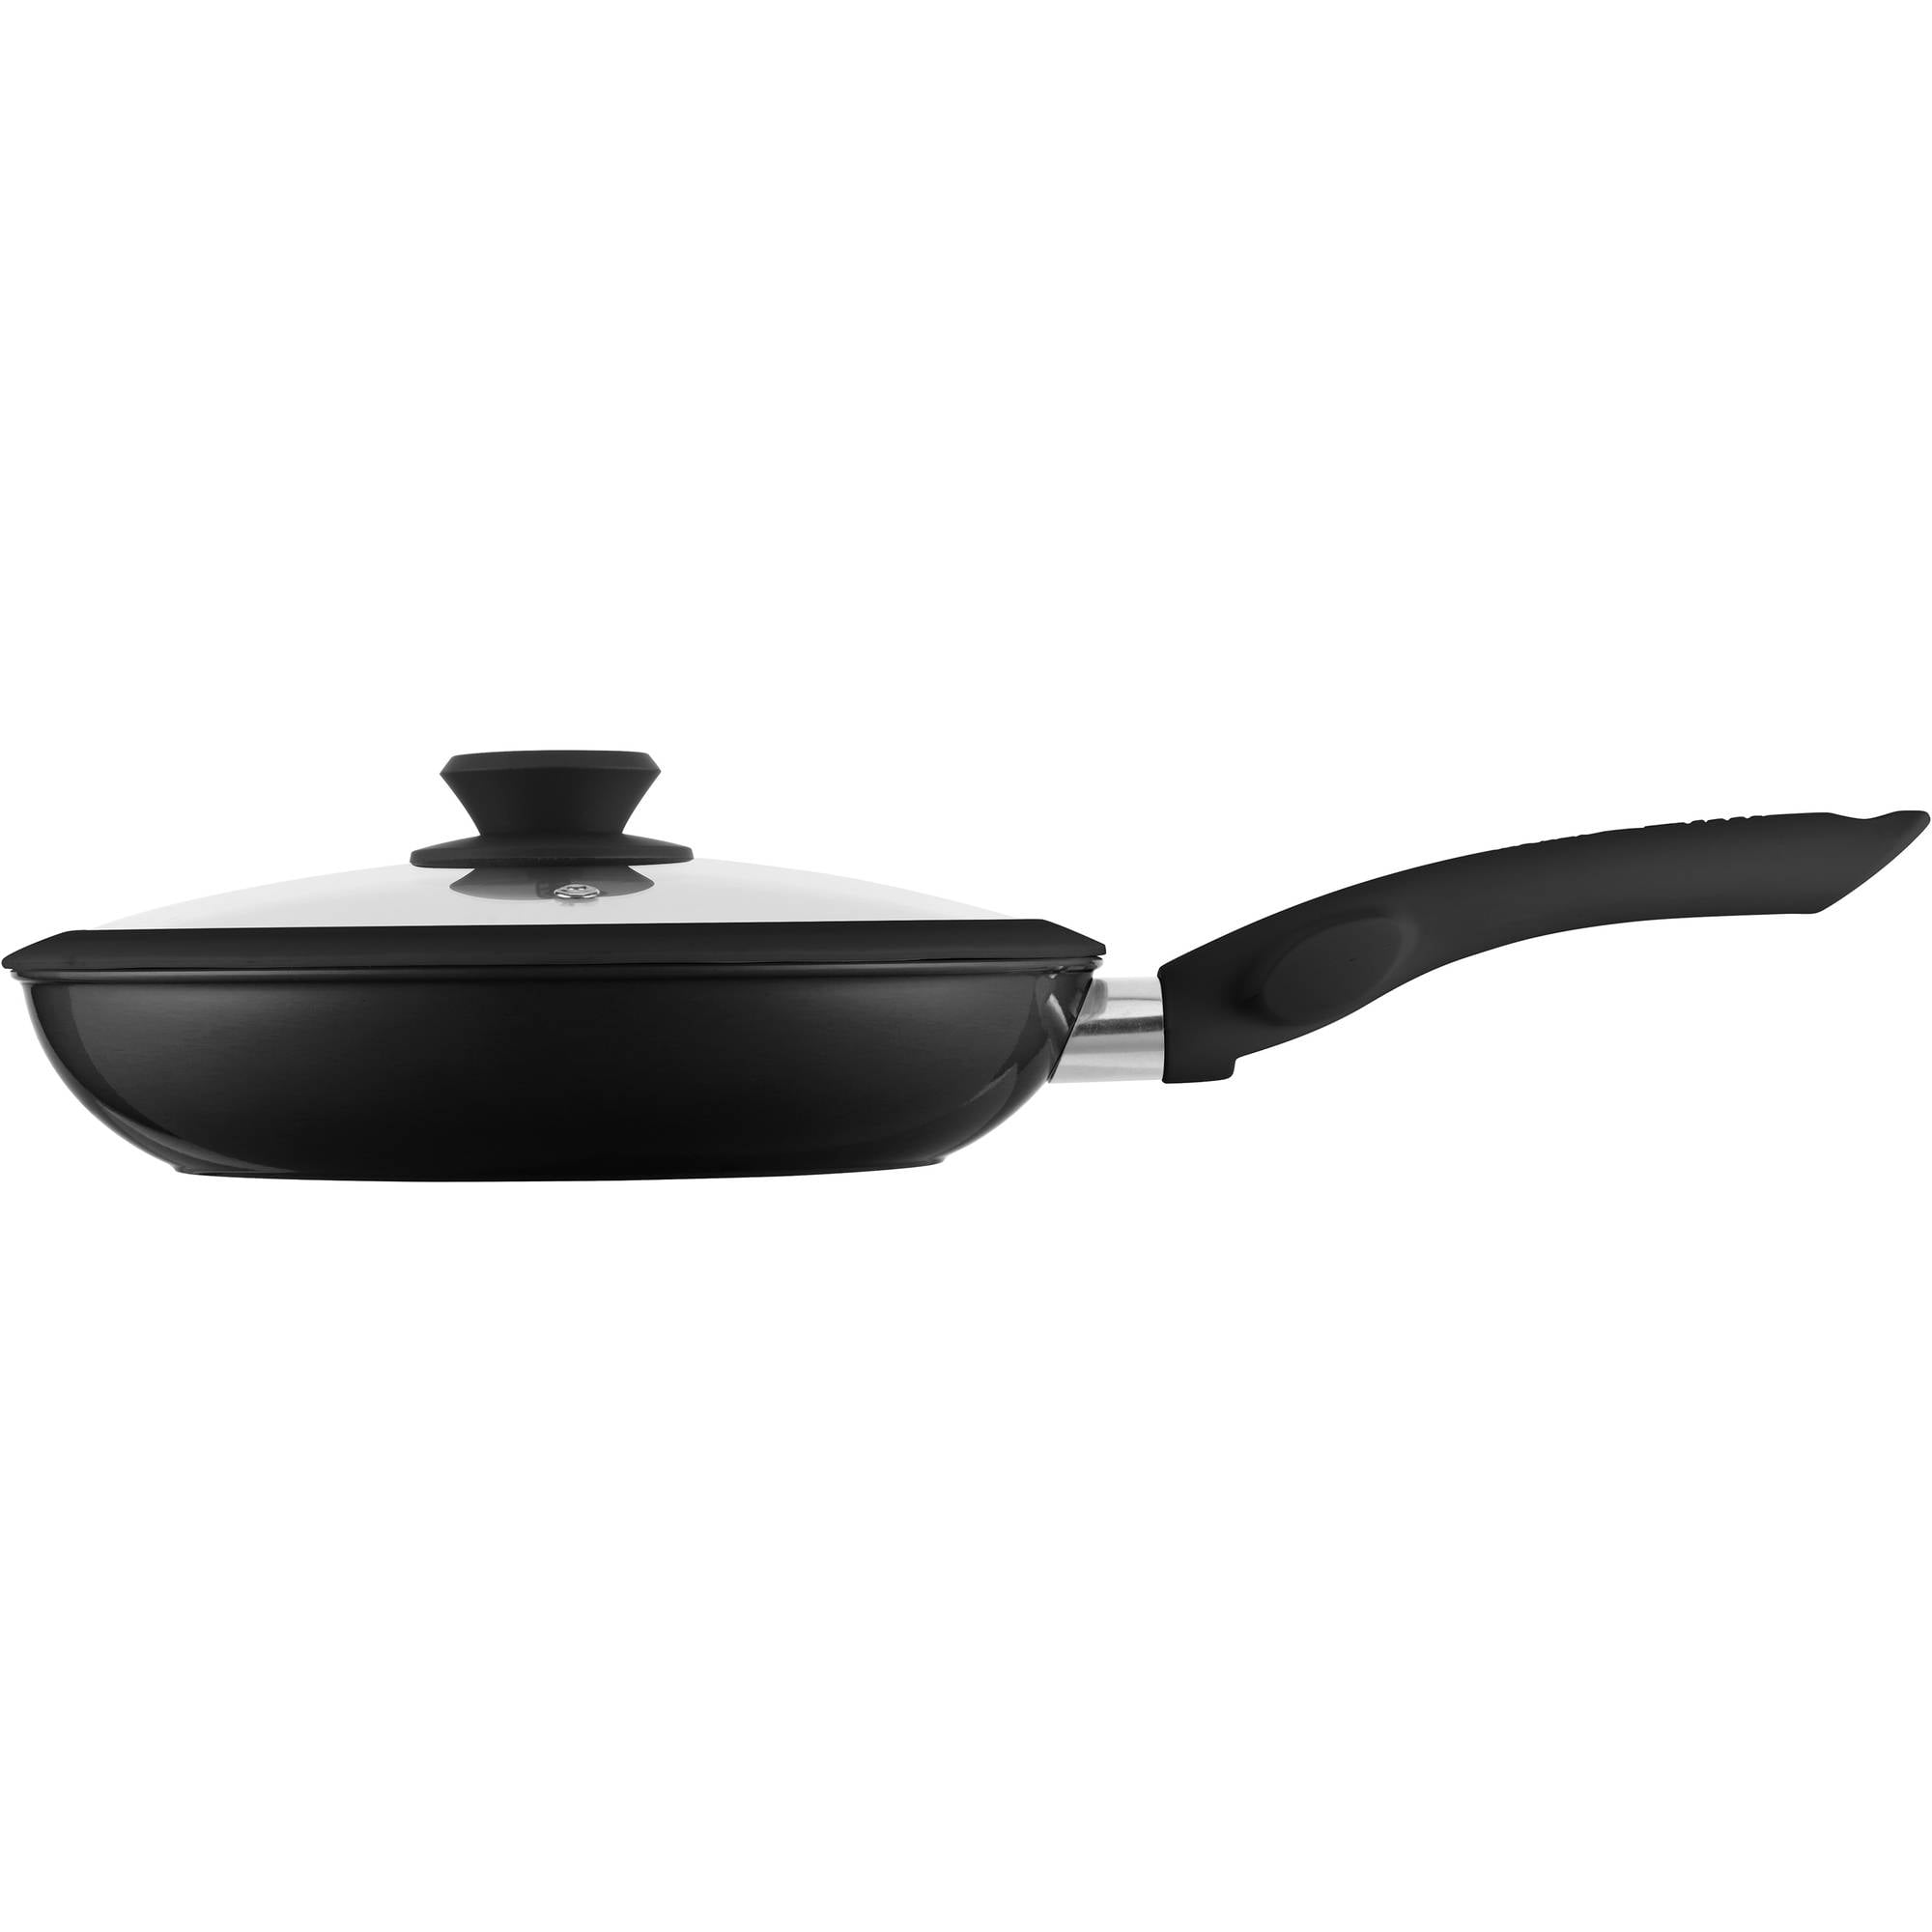 Safe-T-Grip 9 and 11 Ceramic Nonstick Fry Pans with Lids - 20803450